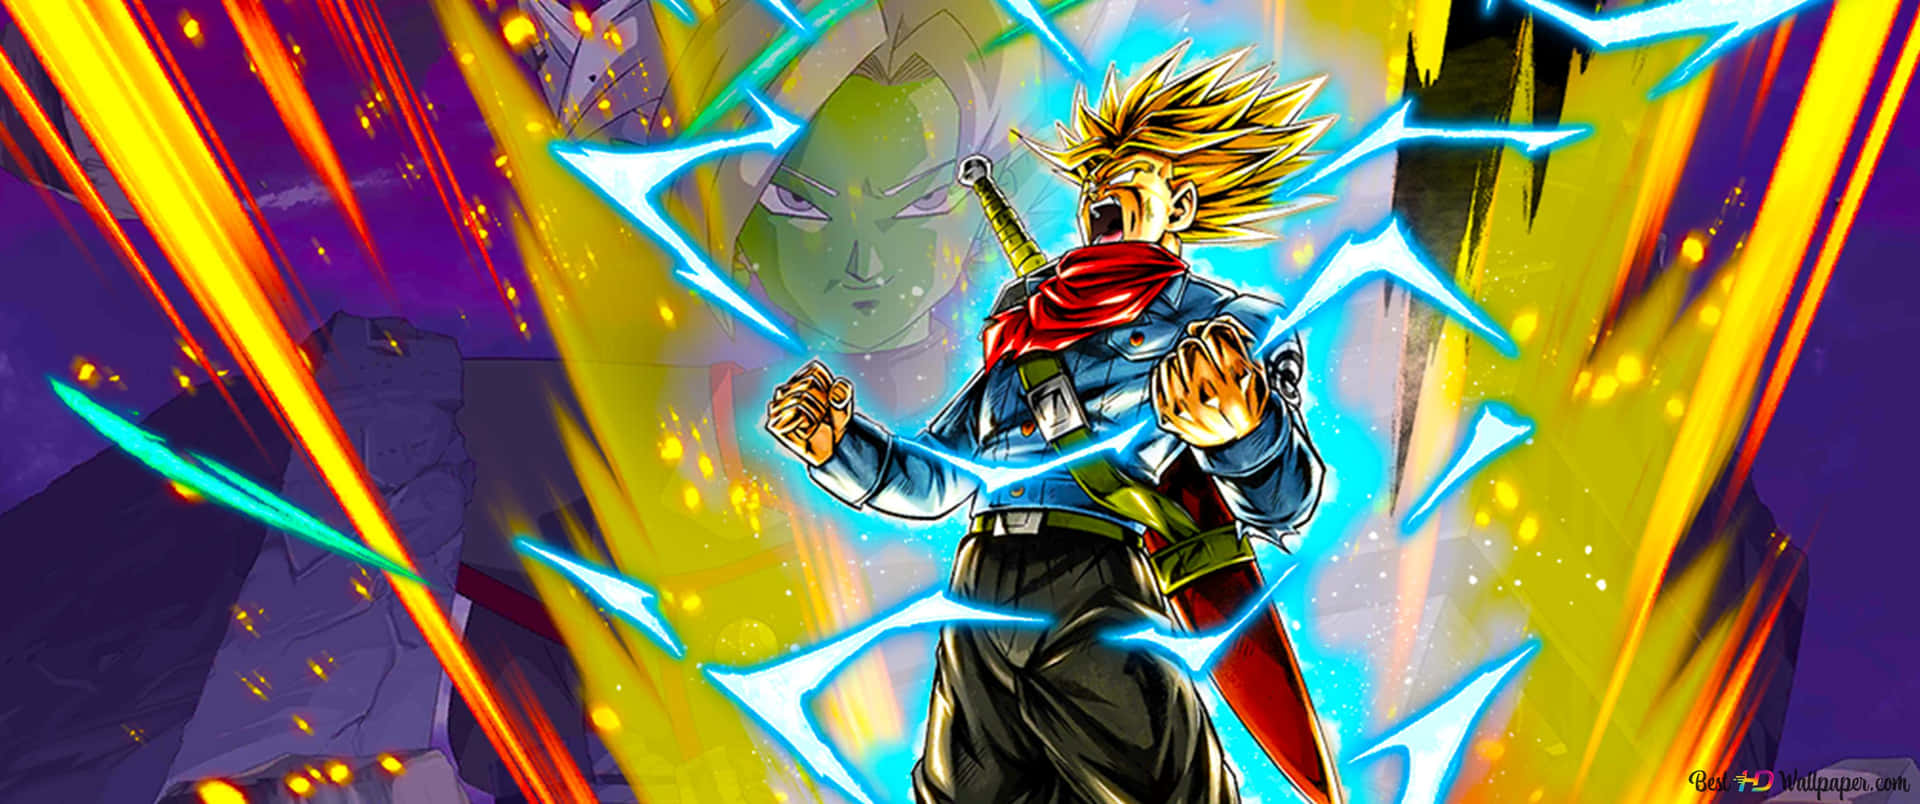 Trunks With His Sword Ready in Dragon Ball Z Wallpaper